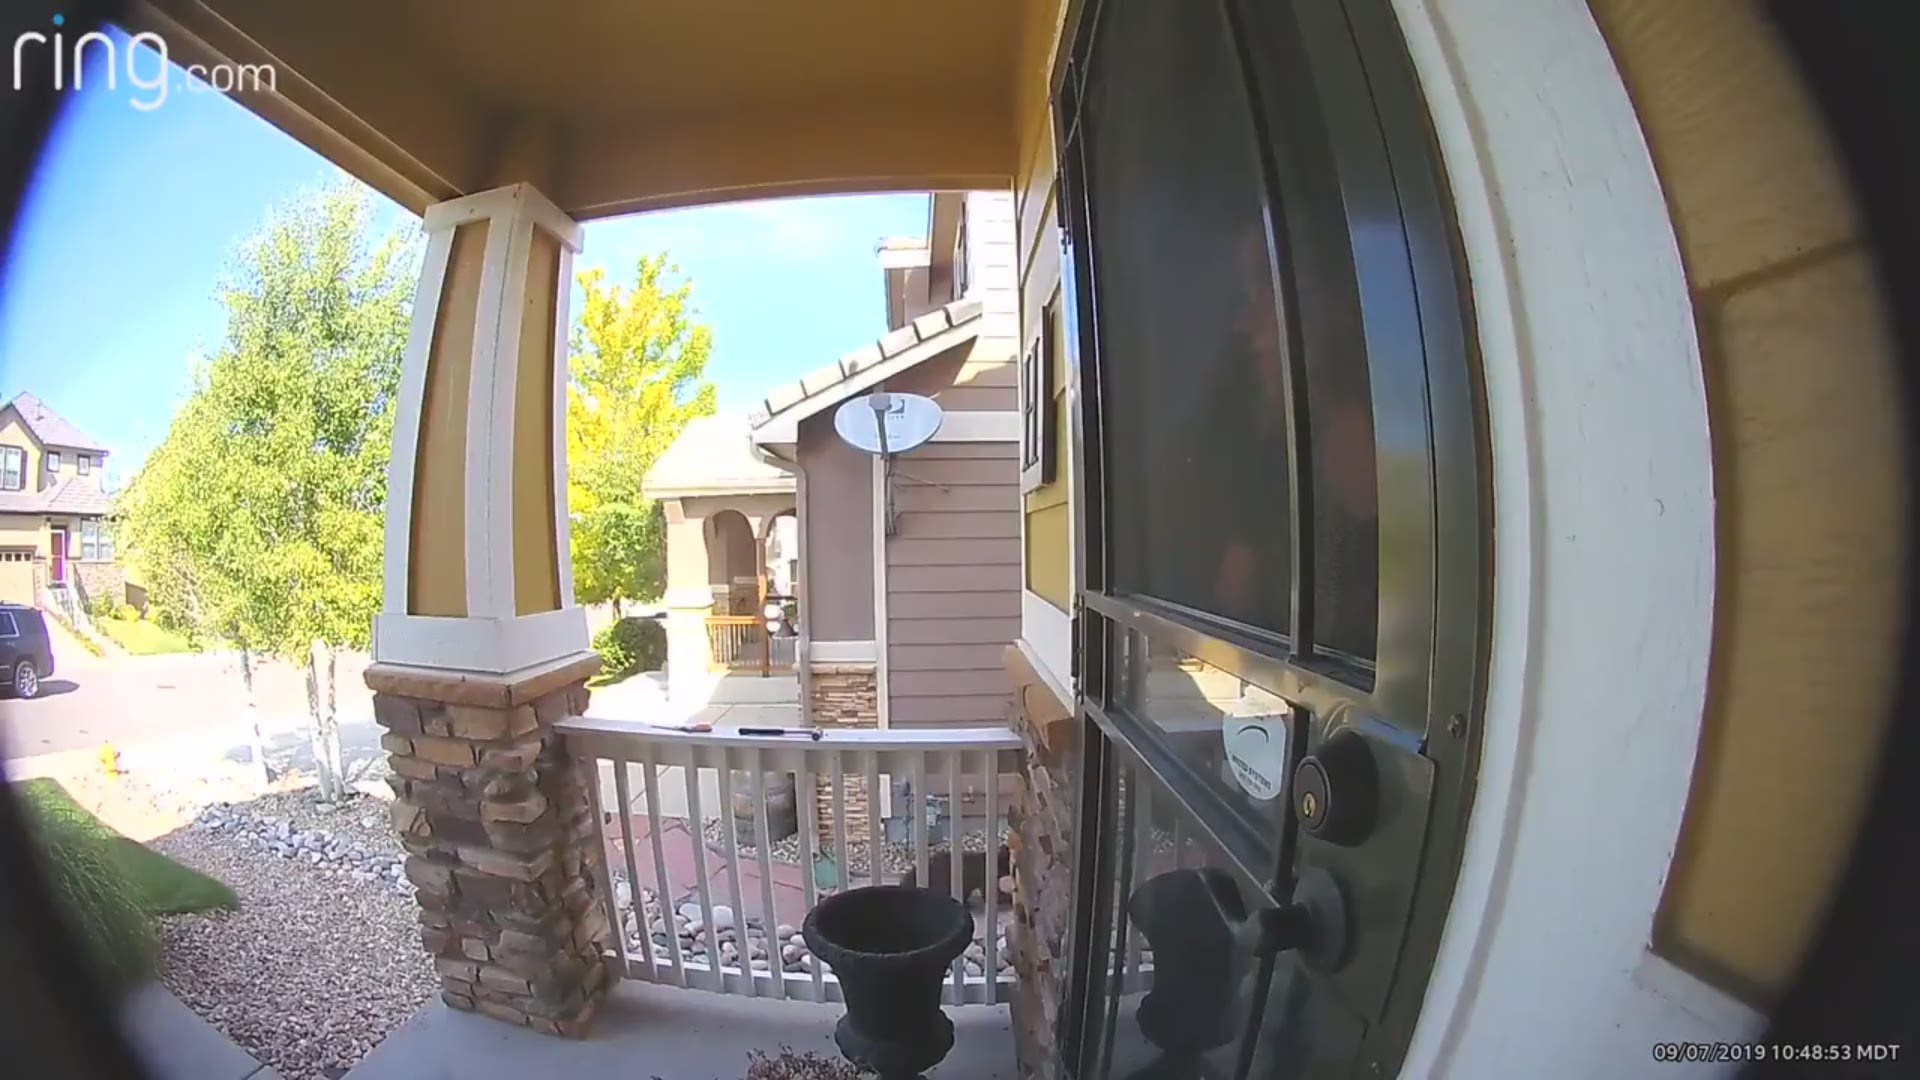 A bear cub was caught on doorbell camera wandering by the front door of a home in Highlands Ranch Saturday morning.